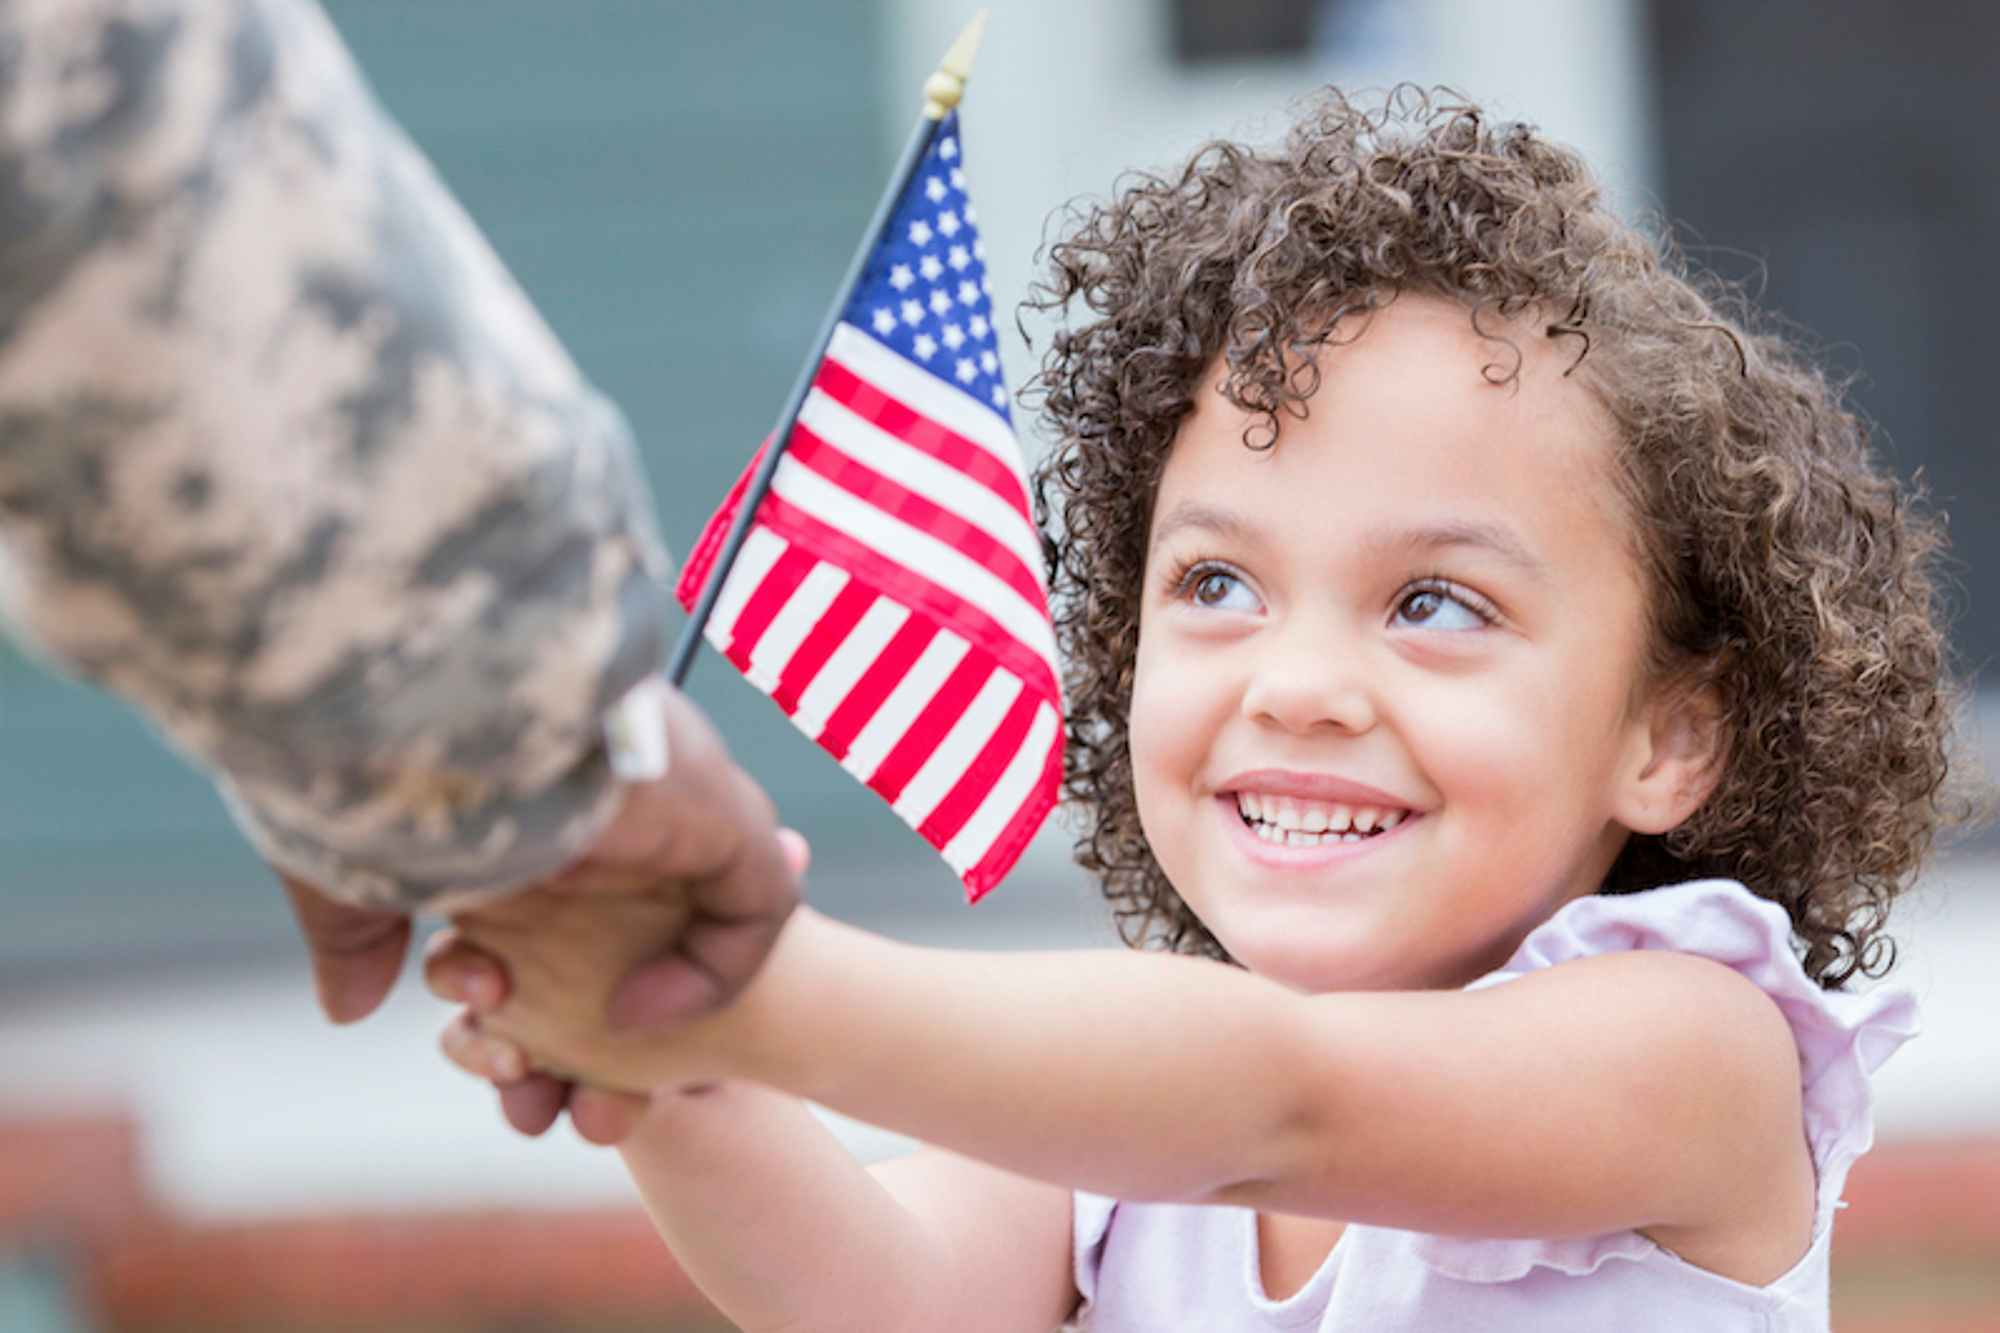 A little girl smiles up at her military dad while holding his hand. She is also holding a small US flag.